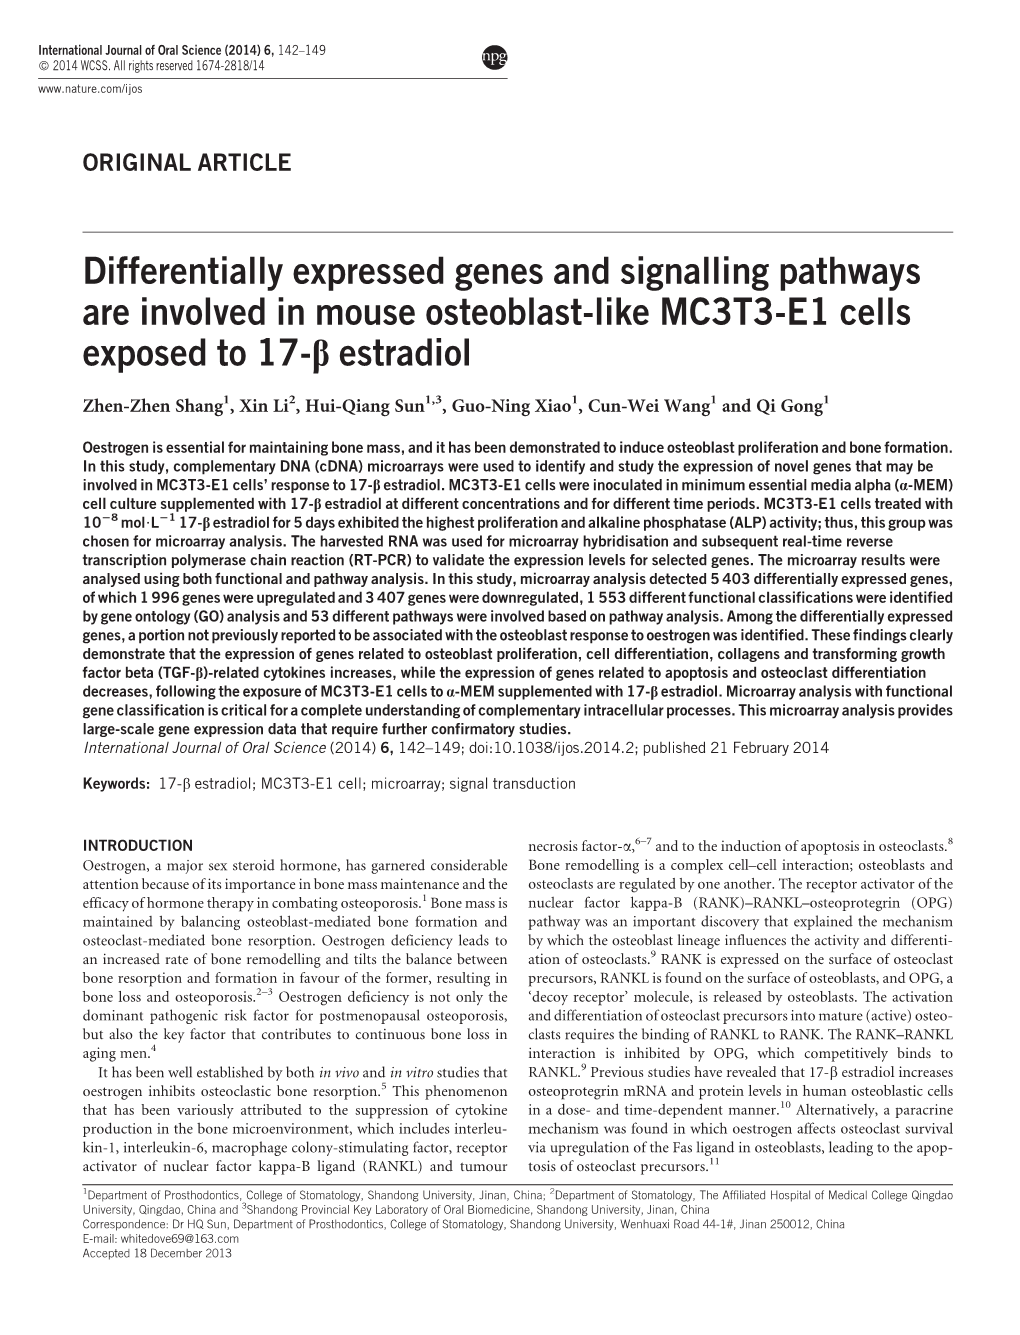 Differentially Expressed Genes and Signalling Pathways Are Involved in Mouse Osteoblast-Like MC3T3-E1 Cells Exposed to 17-Β